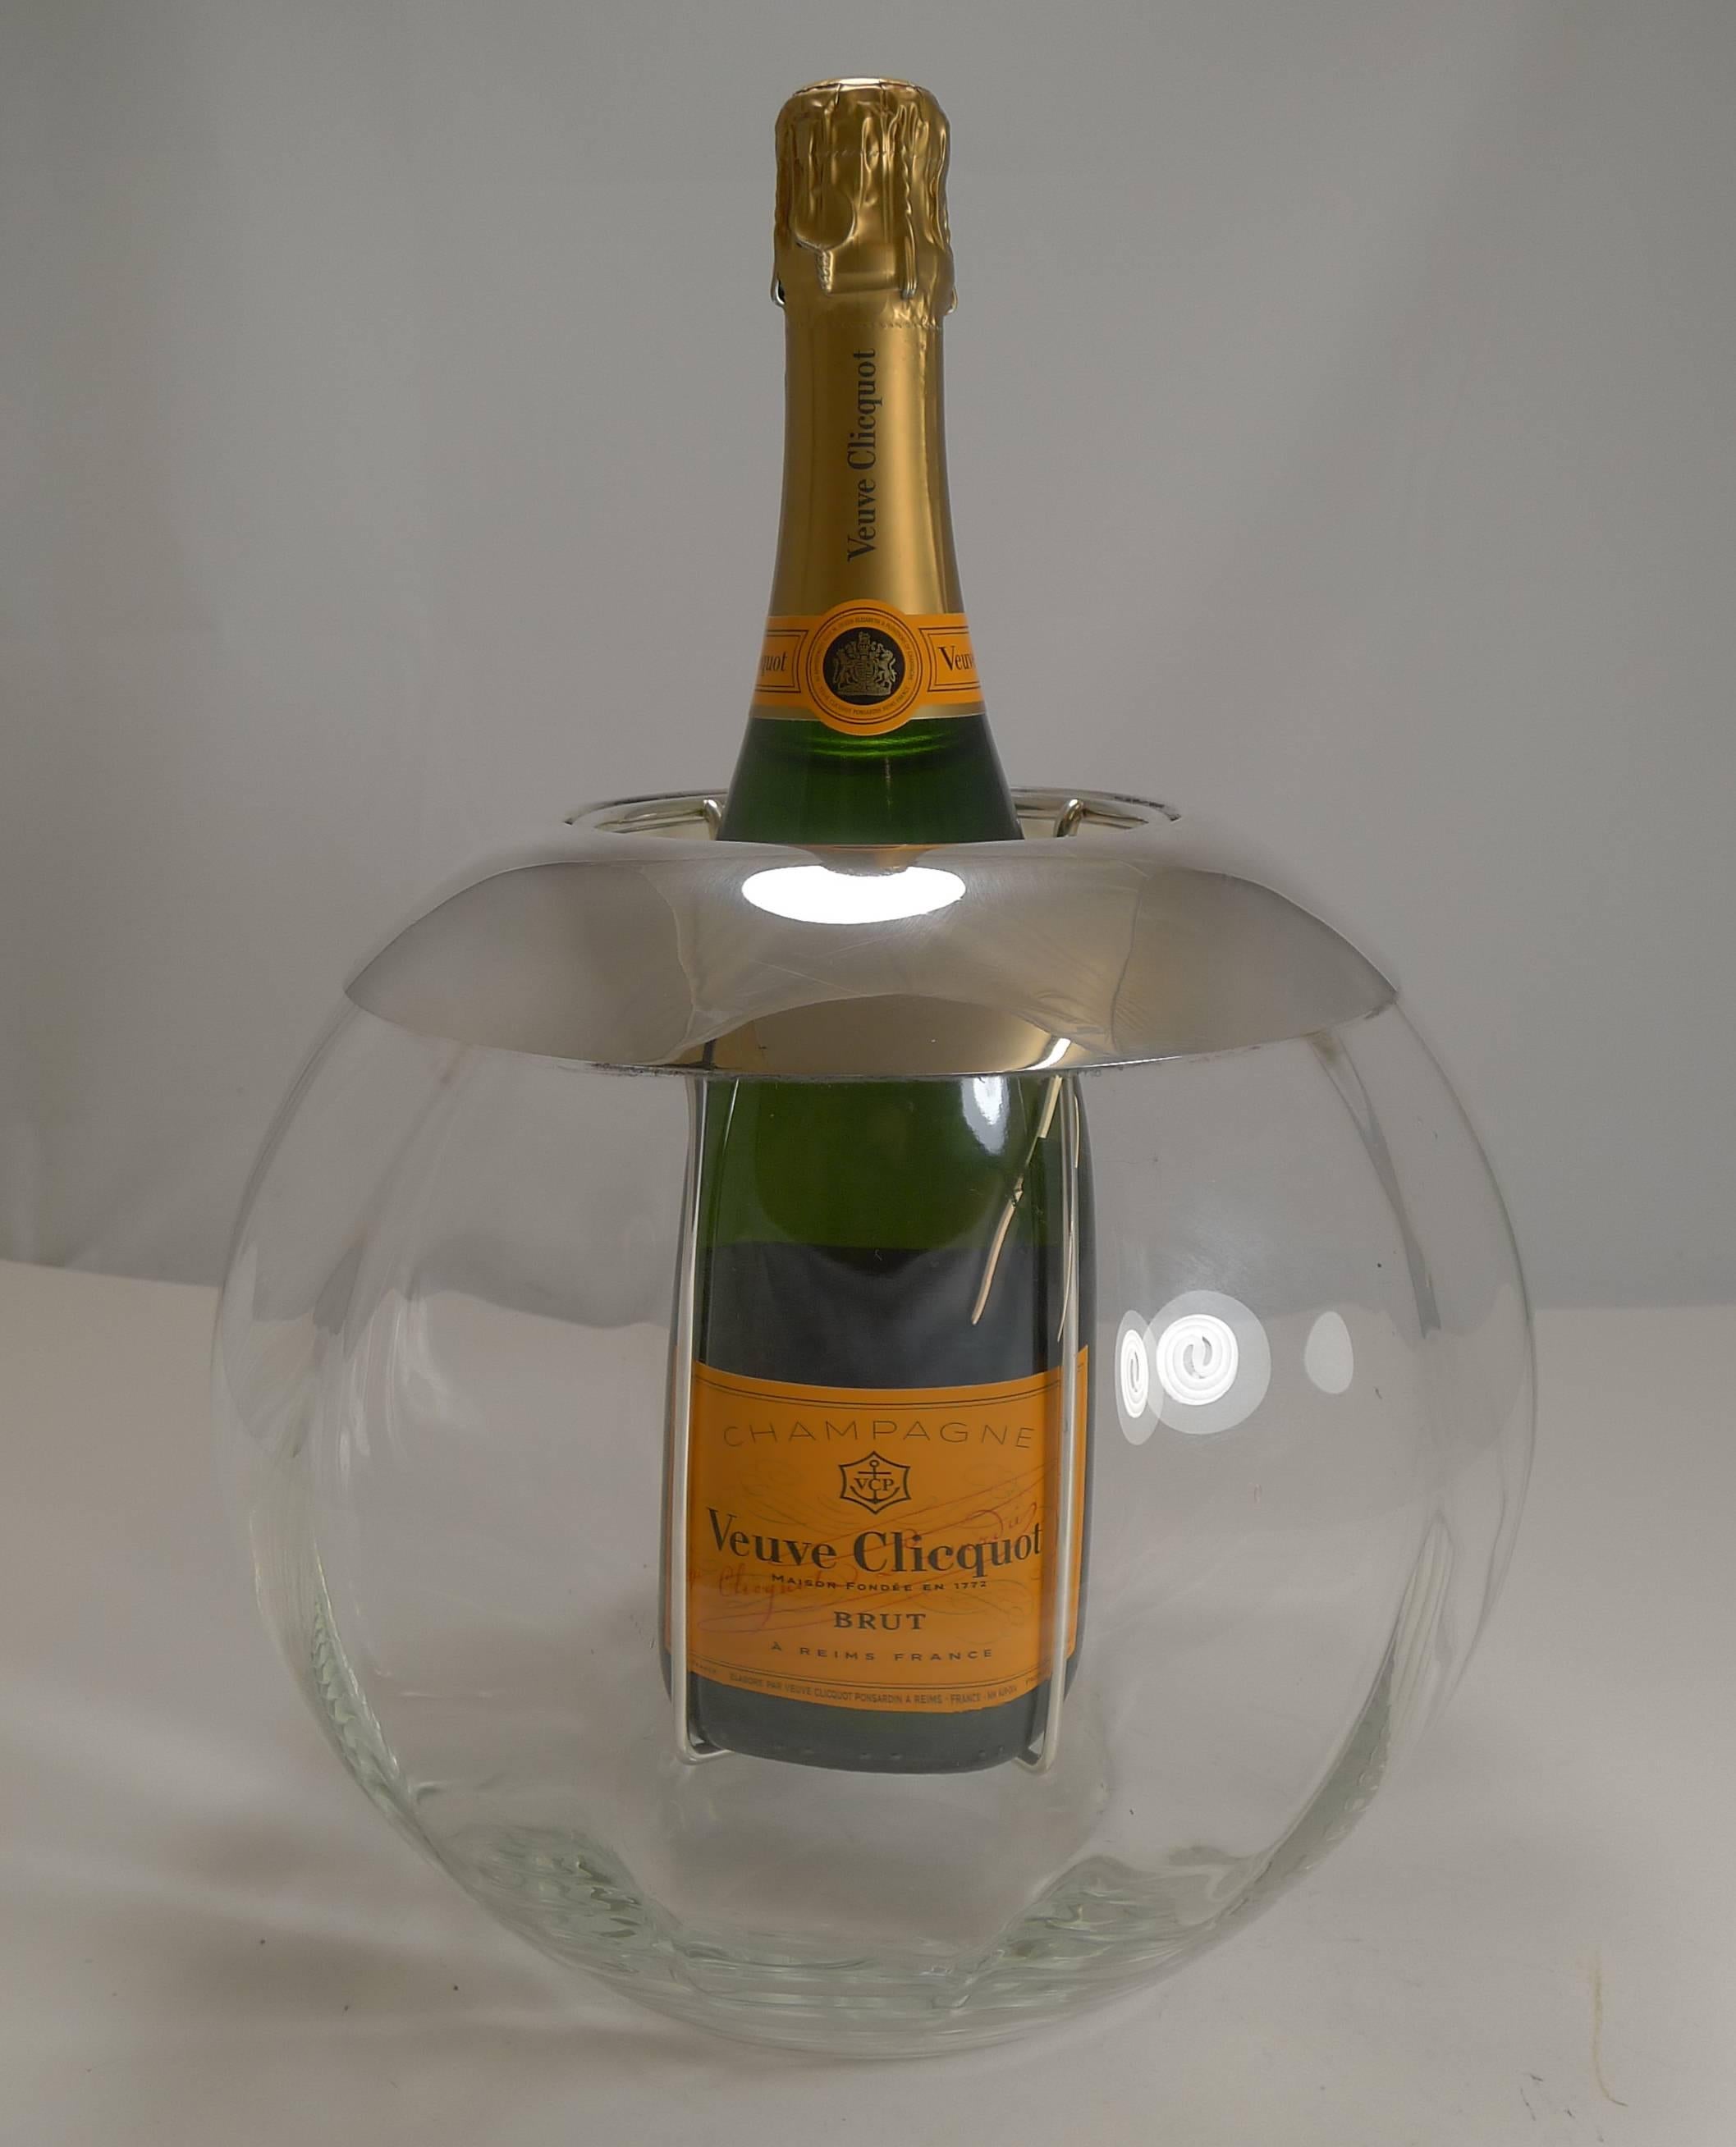 This is what everybody is looking for right now, this highly sought after Champagne or wine cooler dates to the mid-twentieth century and will be the star of your mid-century modern bar.

Made in a spherical form from glass, it resembles late